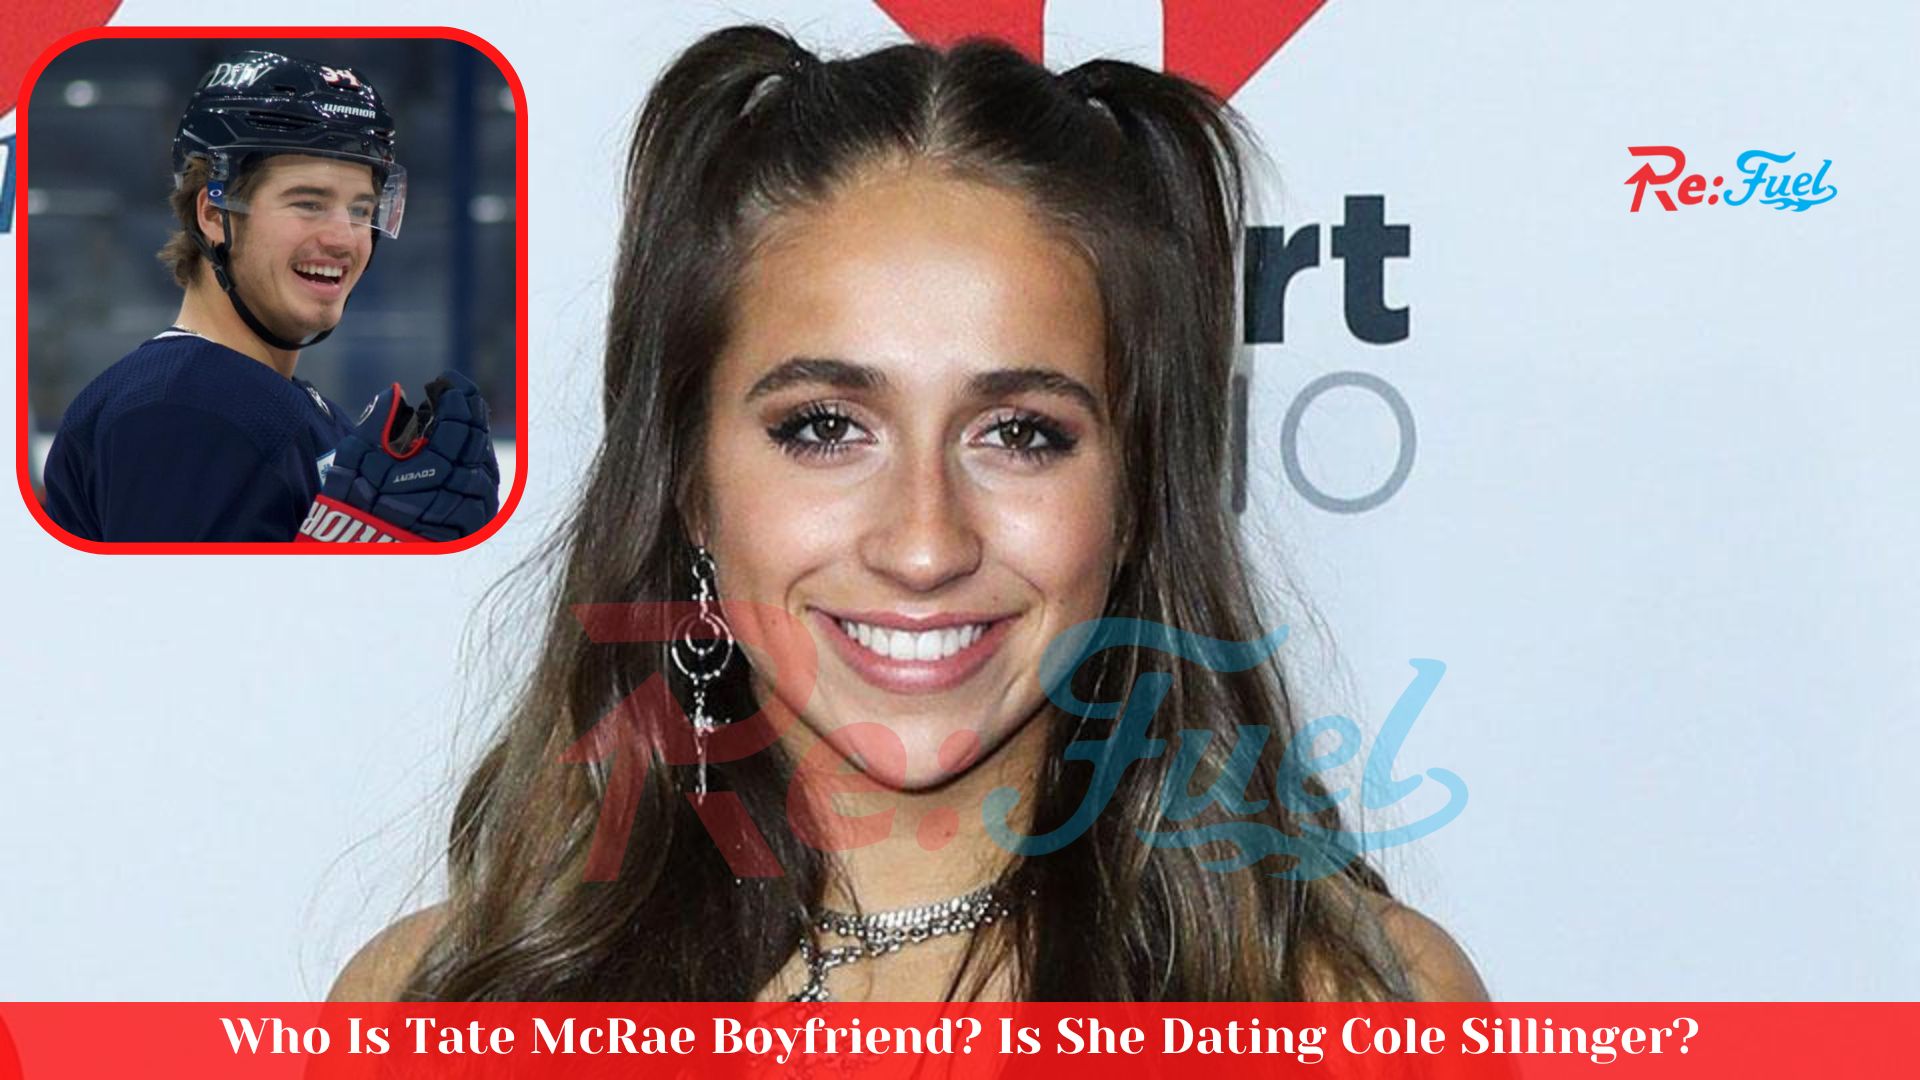 Who Is Tate McRae Boyfriend? Is She Dating Cole Sillinger?